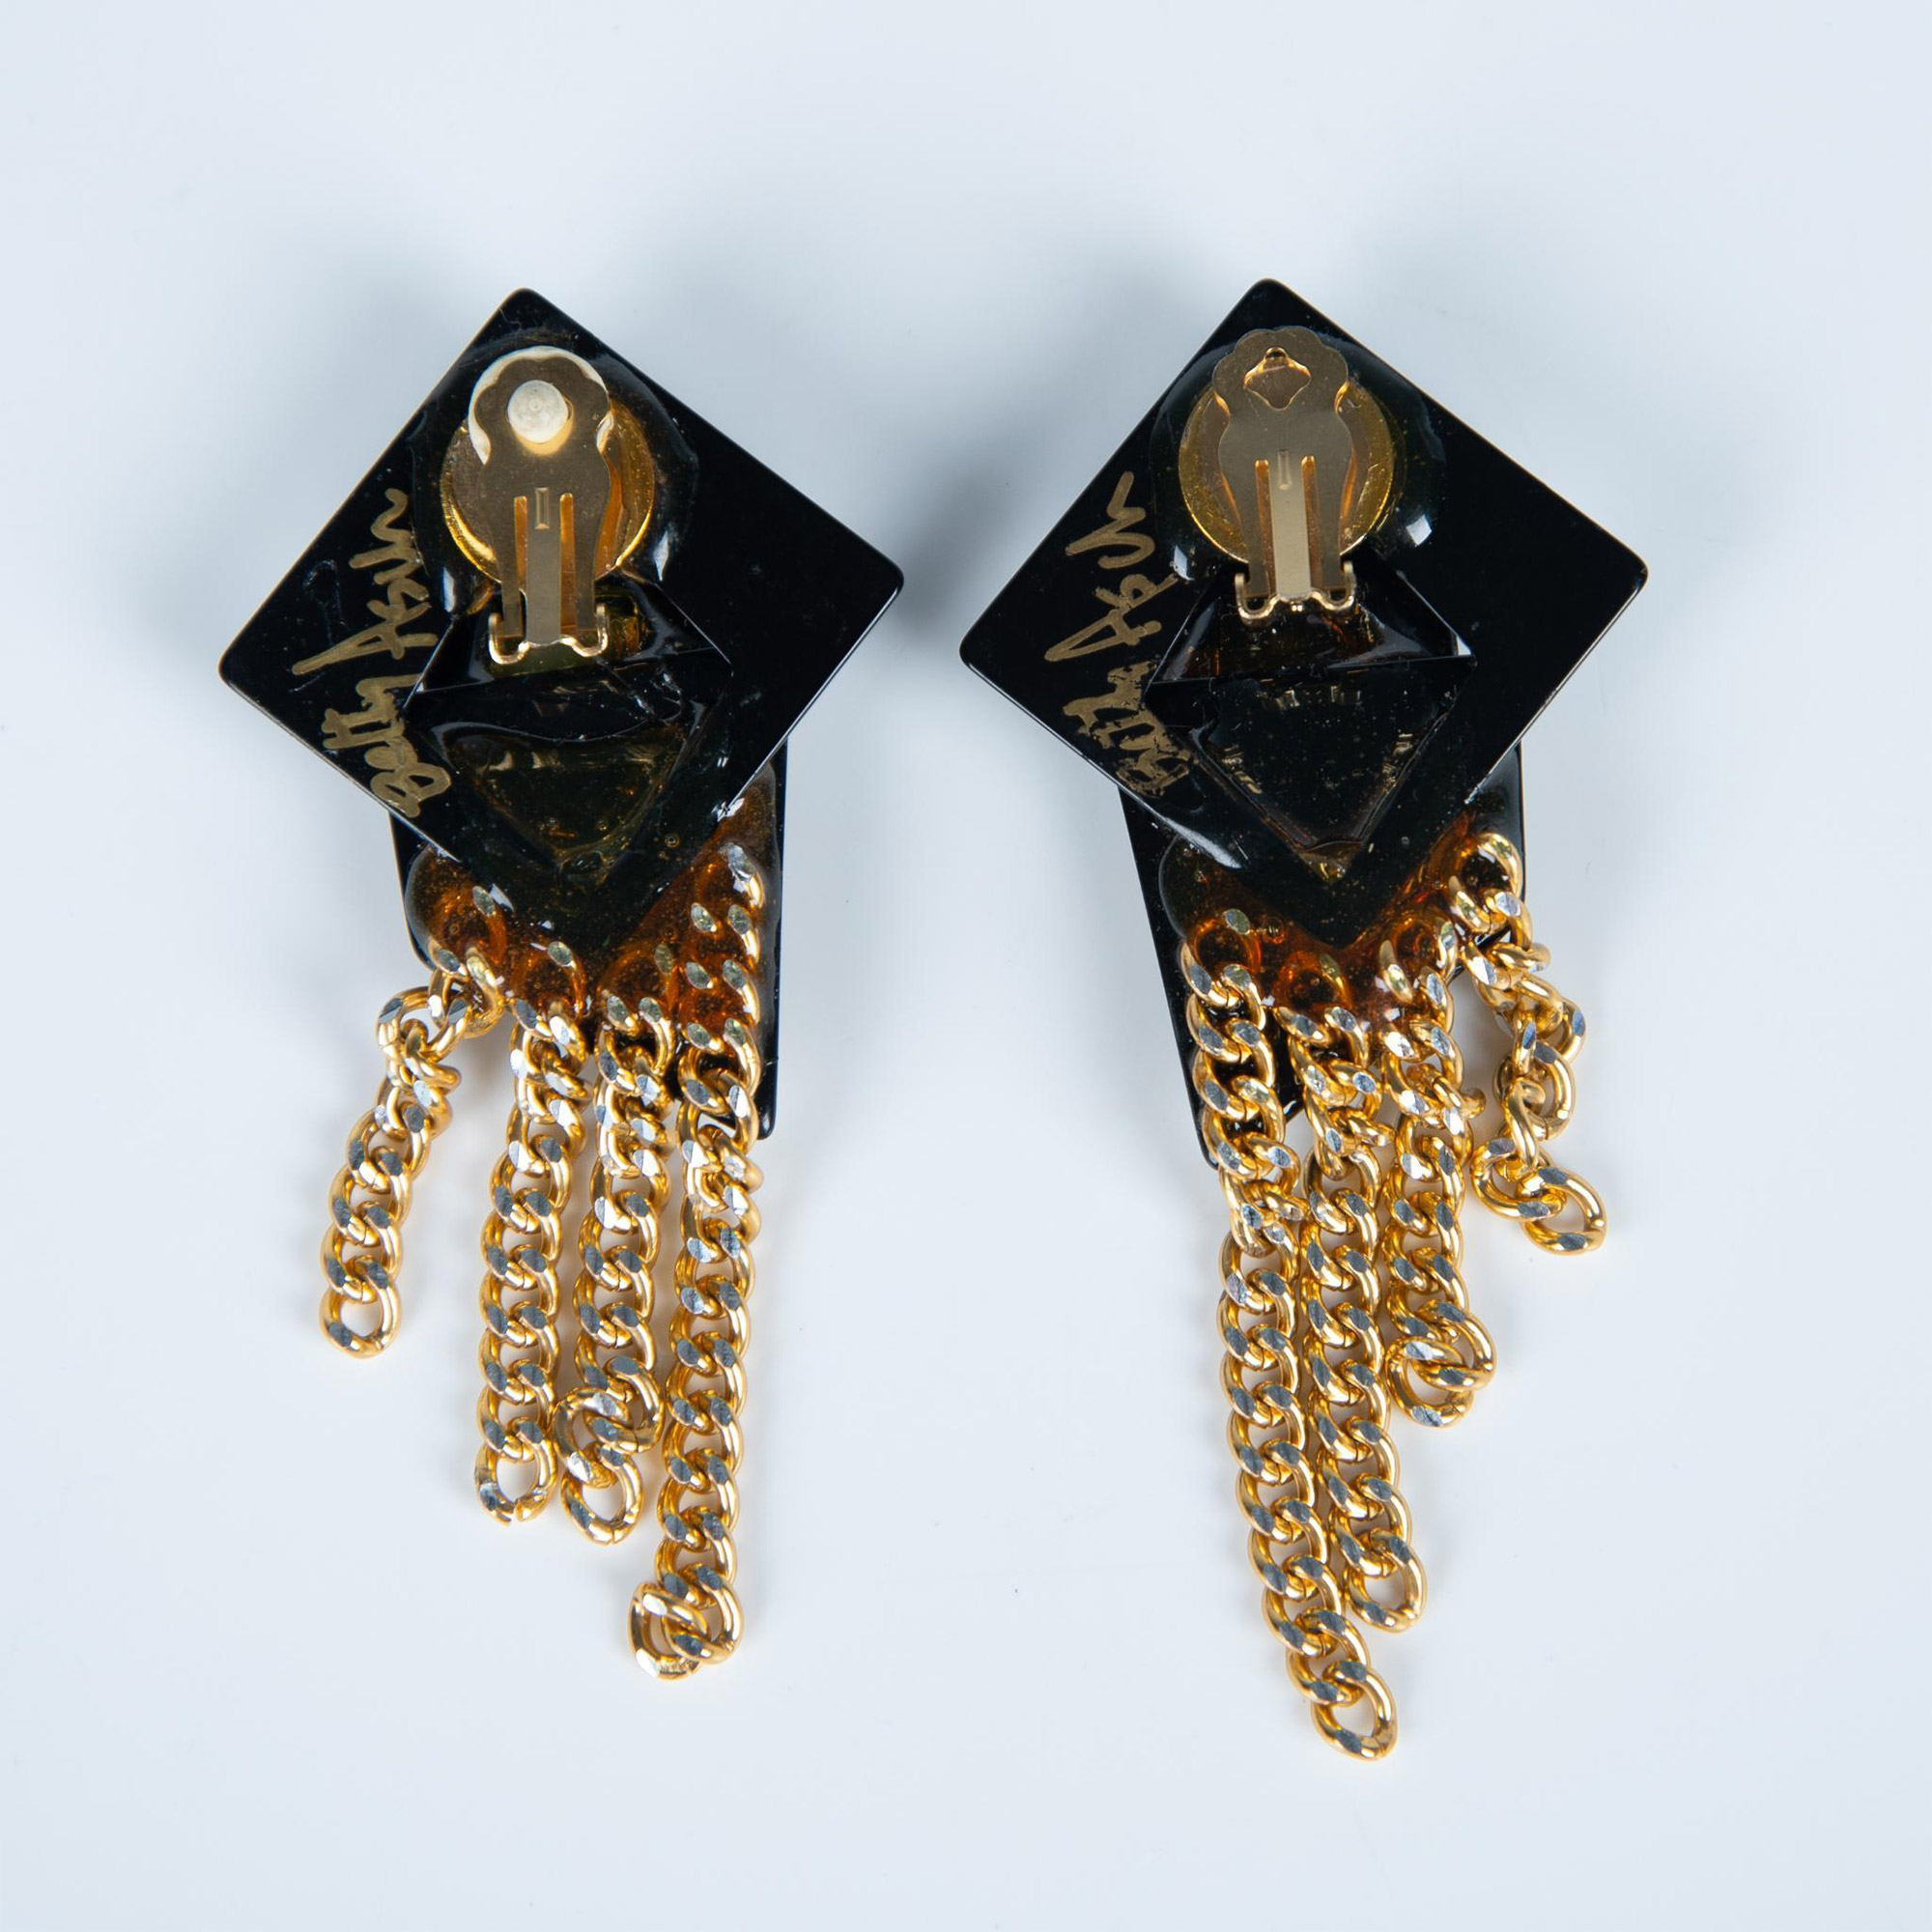 Betty Asch 80's Black & Gold Lucite Clip-On Earrings, Signed - Image 2 of 3